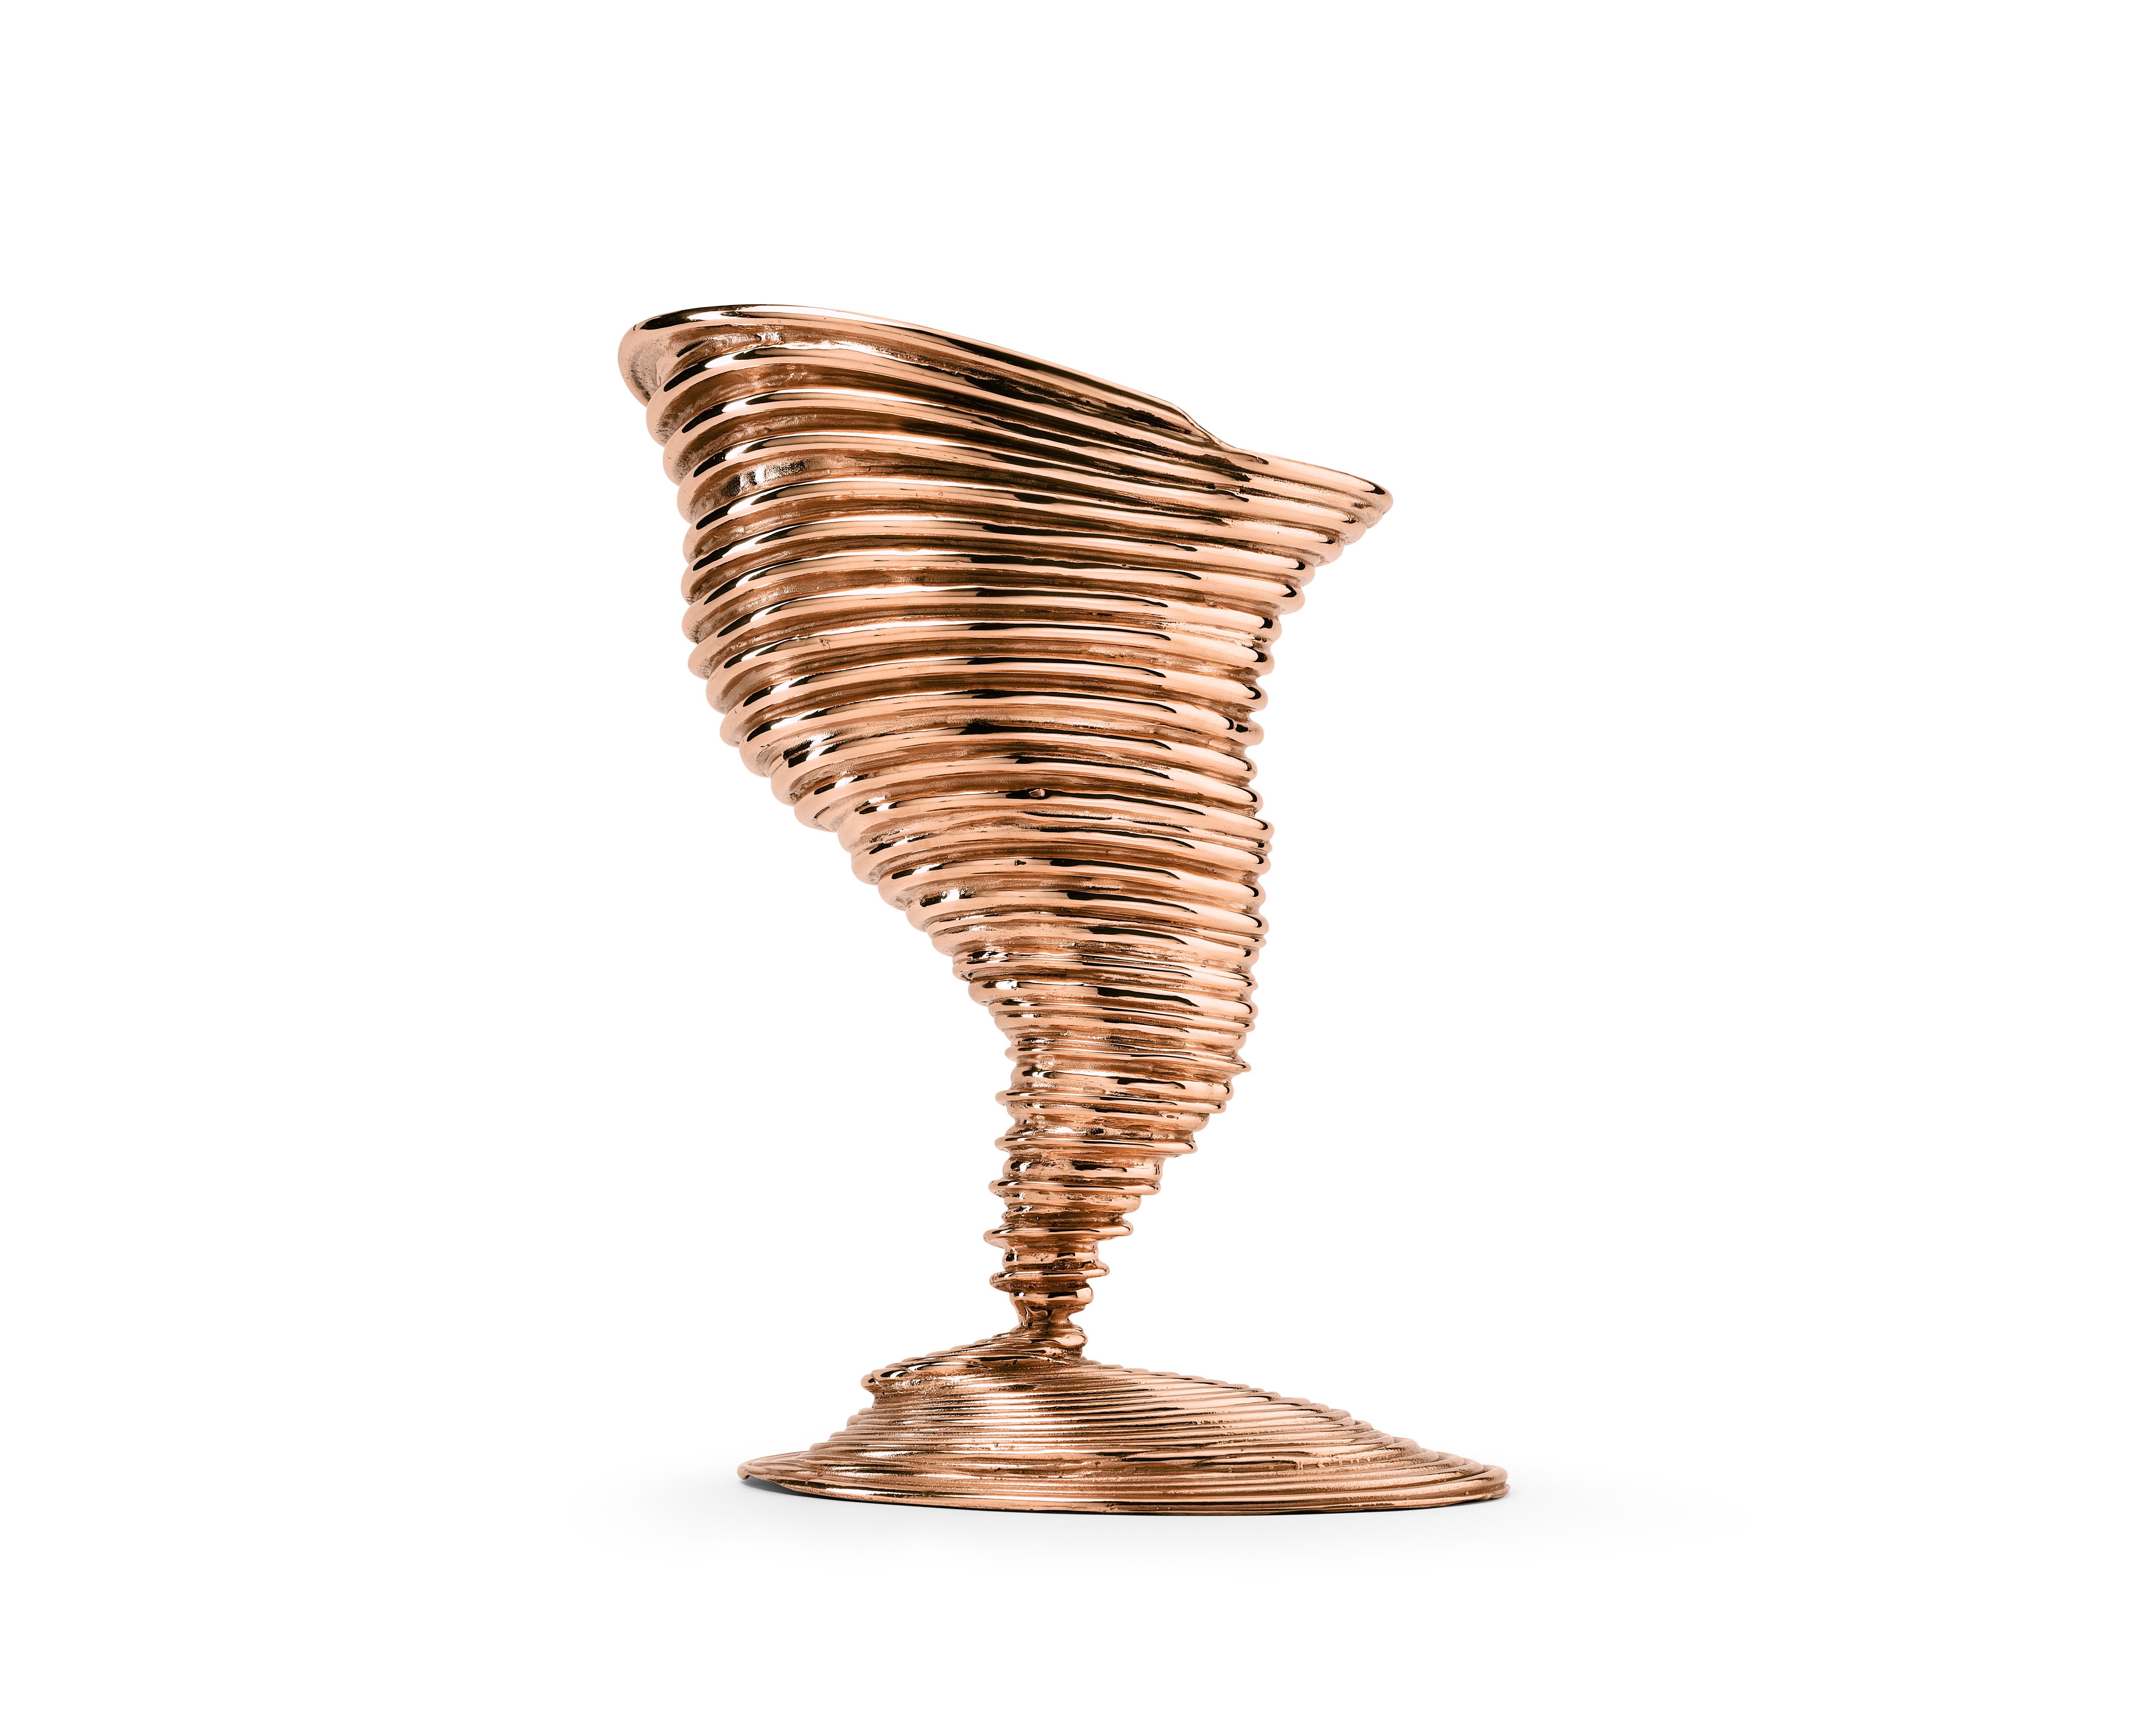 Modern Ghidini 1961 Tornado Sculptural Vase in Bronze by Campana Brothers For Sale